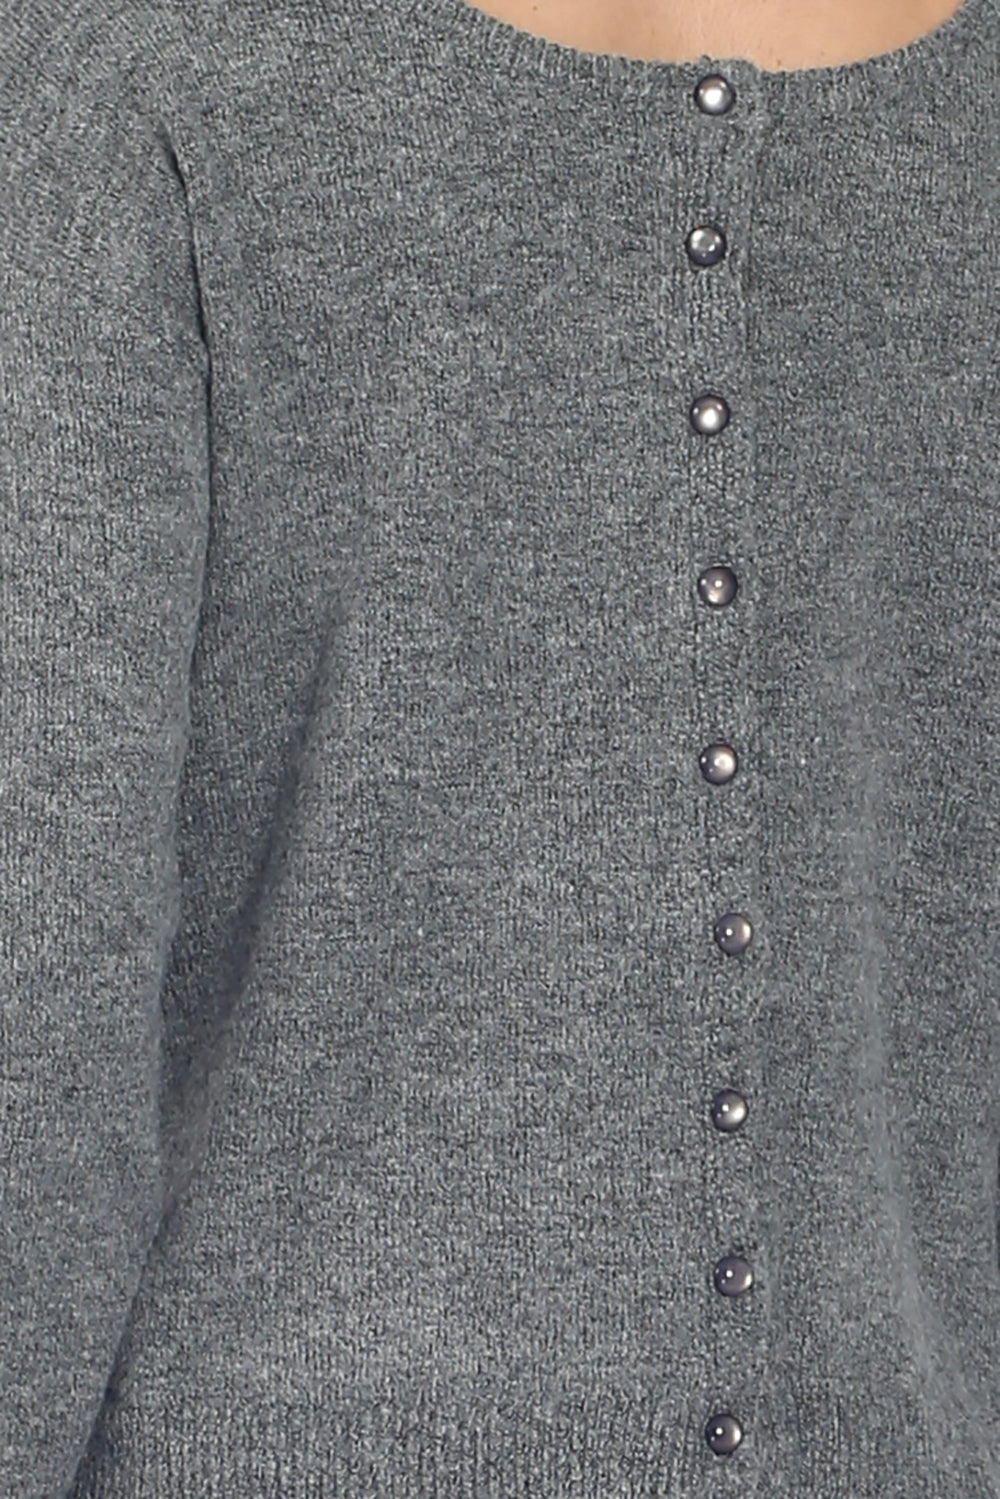 4-thread double-breasted cardigan